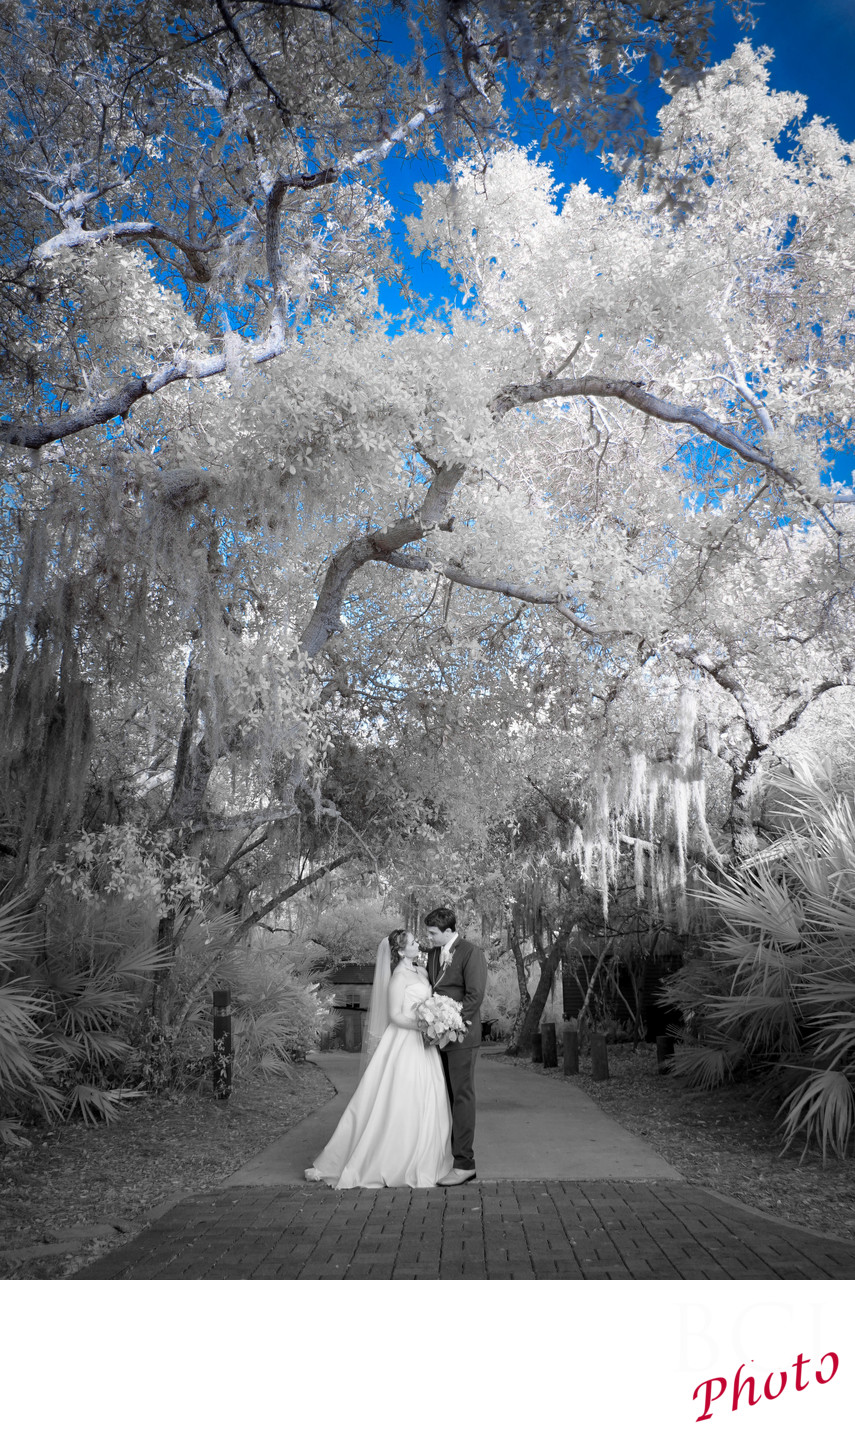 Infrared wedding image from Harbour Ridge.